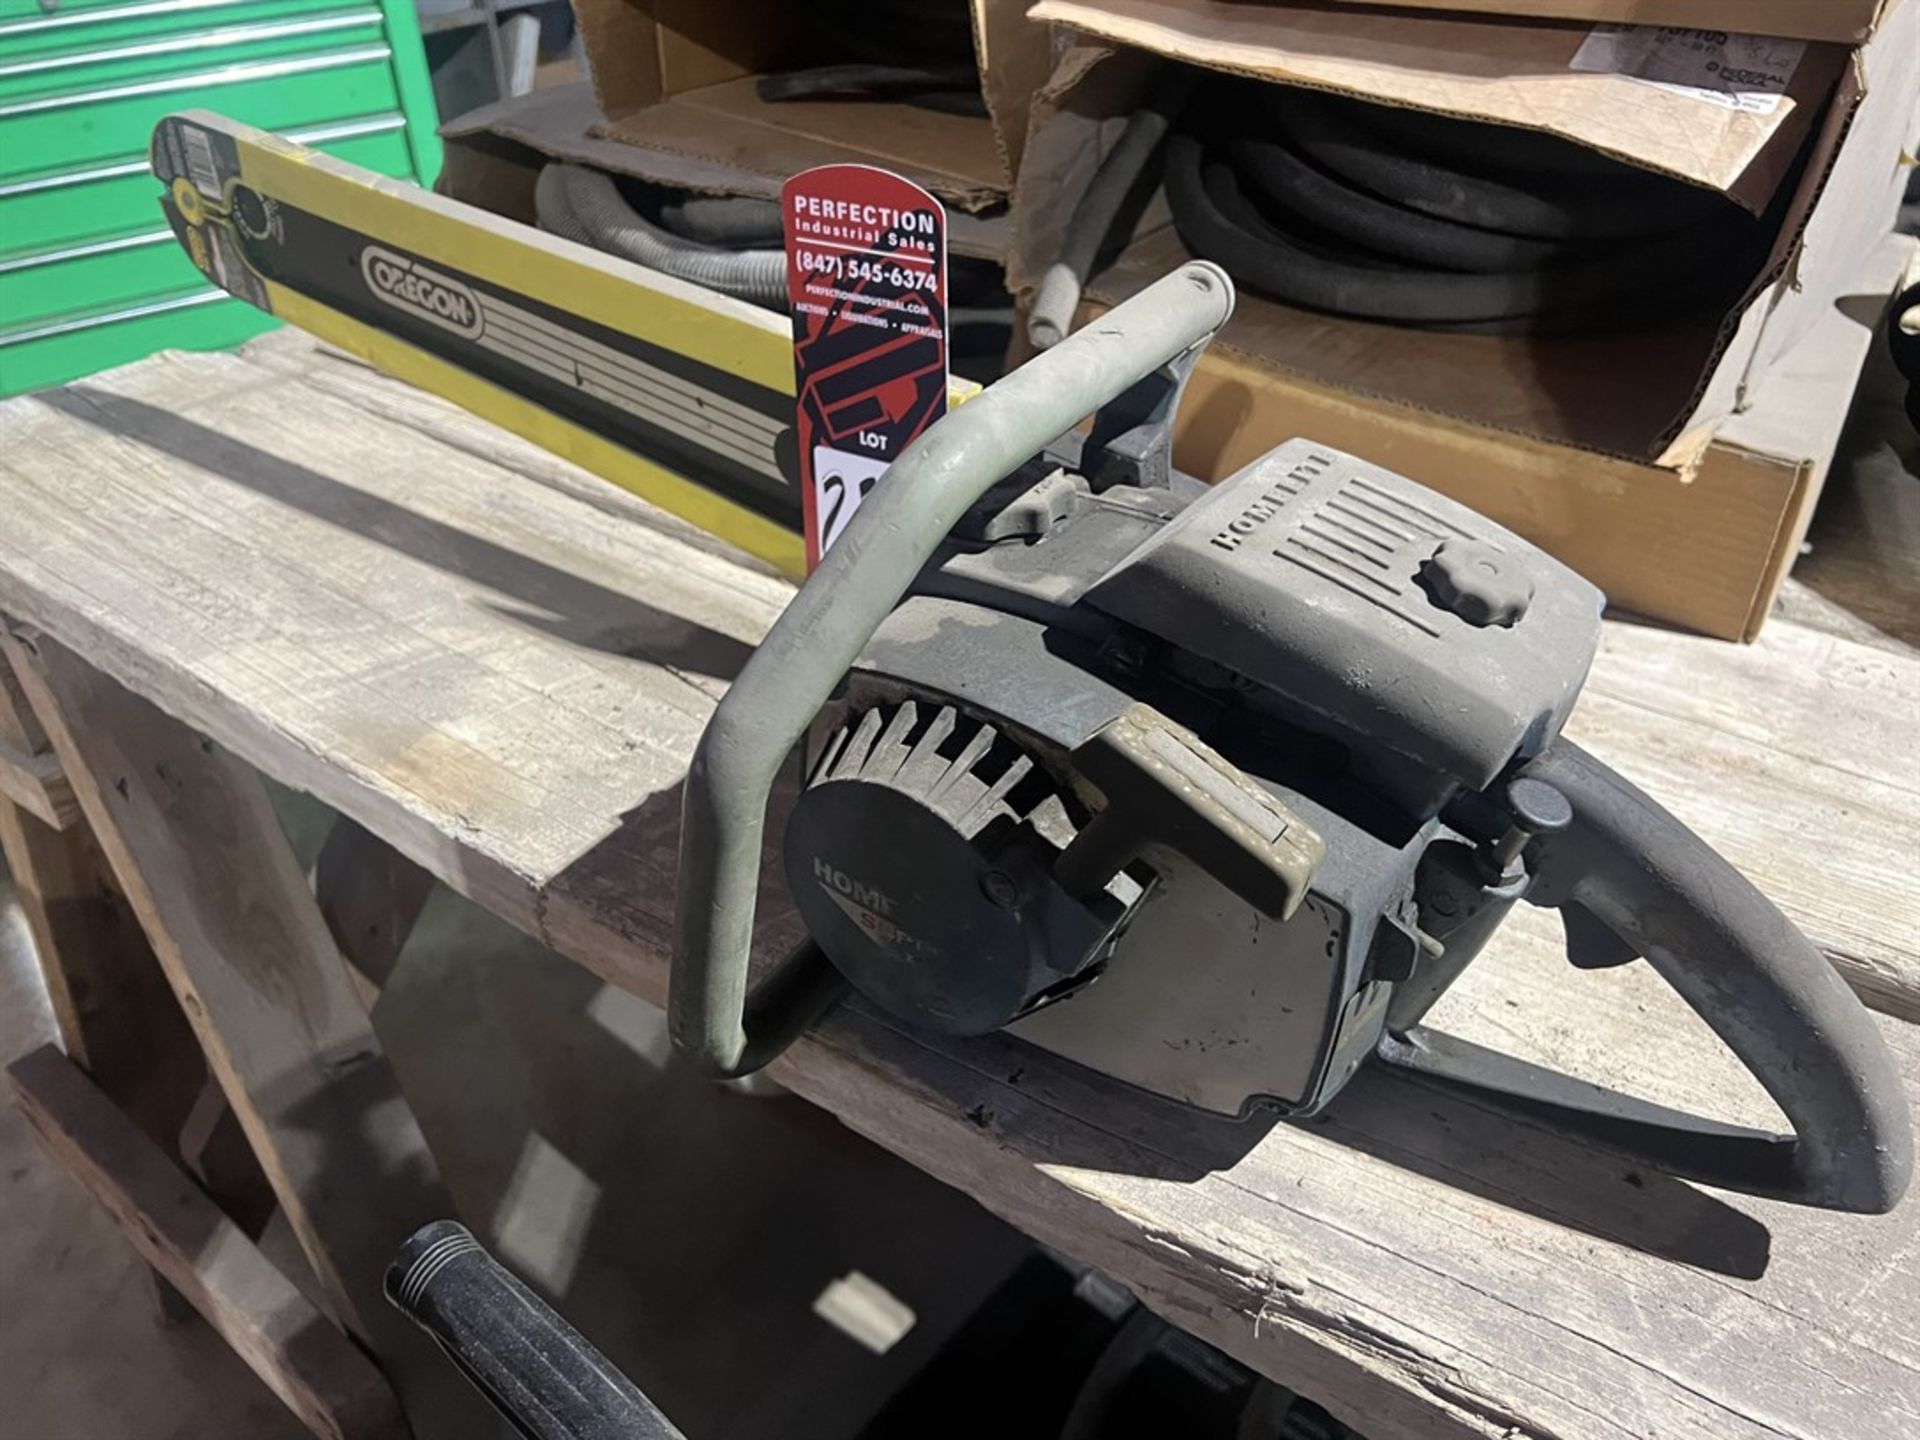 HOMELITE Super XL Chainsaw, (Location 1020 61st Drive, Union Grove, WI 23182) - Image 2 of 4